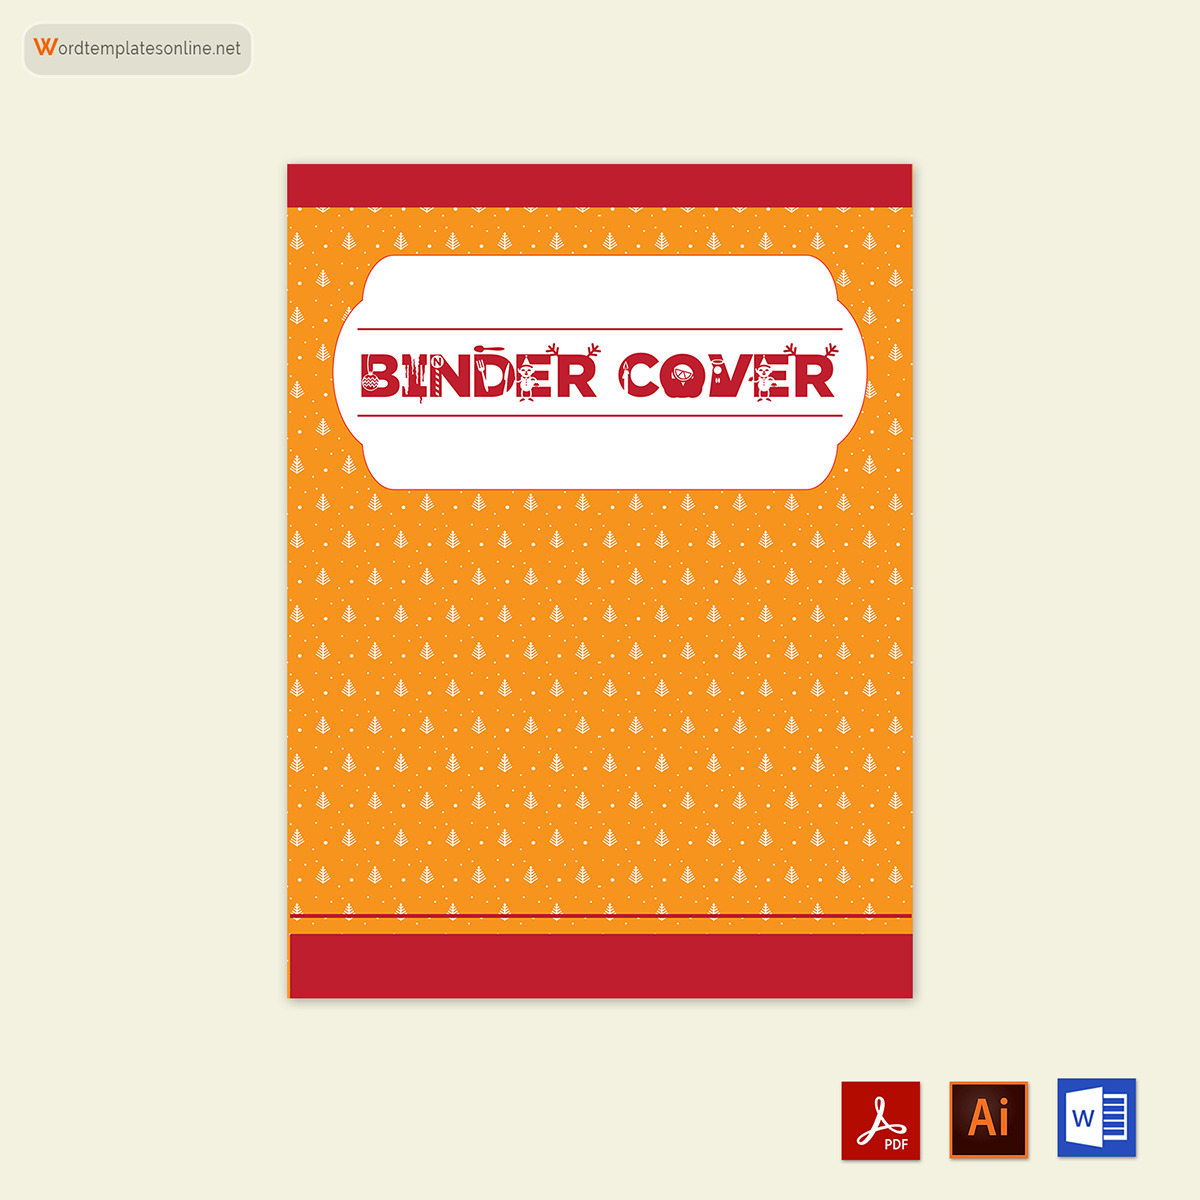 Printable Pattern Binder Cover Template 05 for Word and AI Format